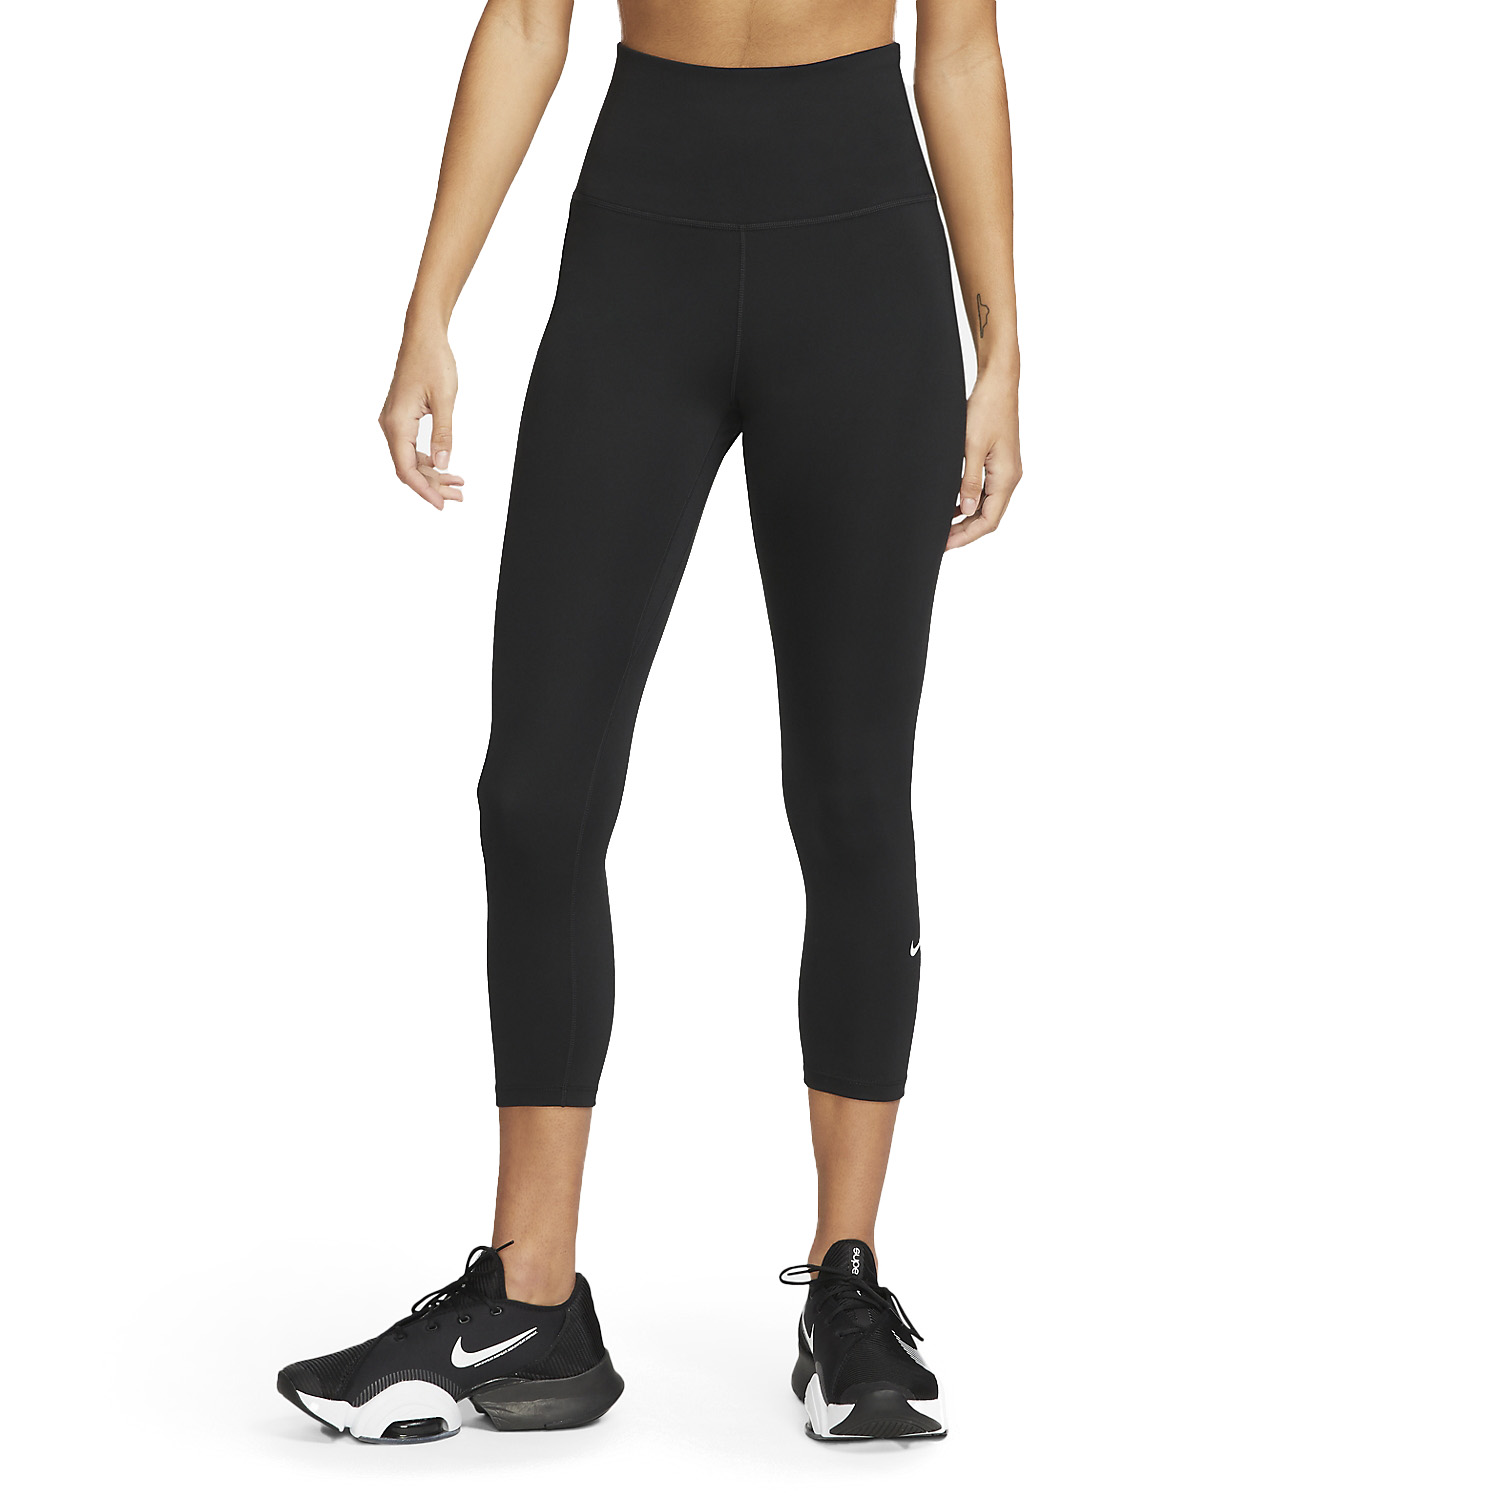 Womens high waisted compression 7/8 leggings Nike ONE MID-RISE 7/8 W black